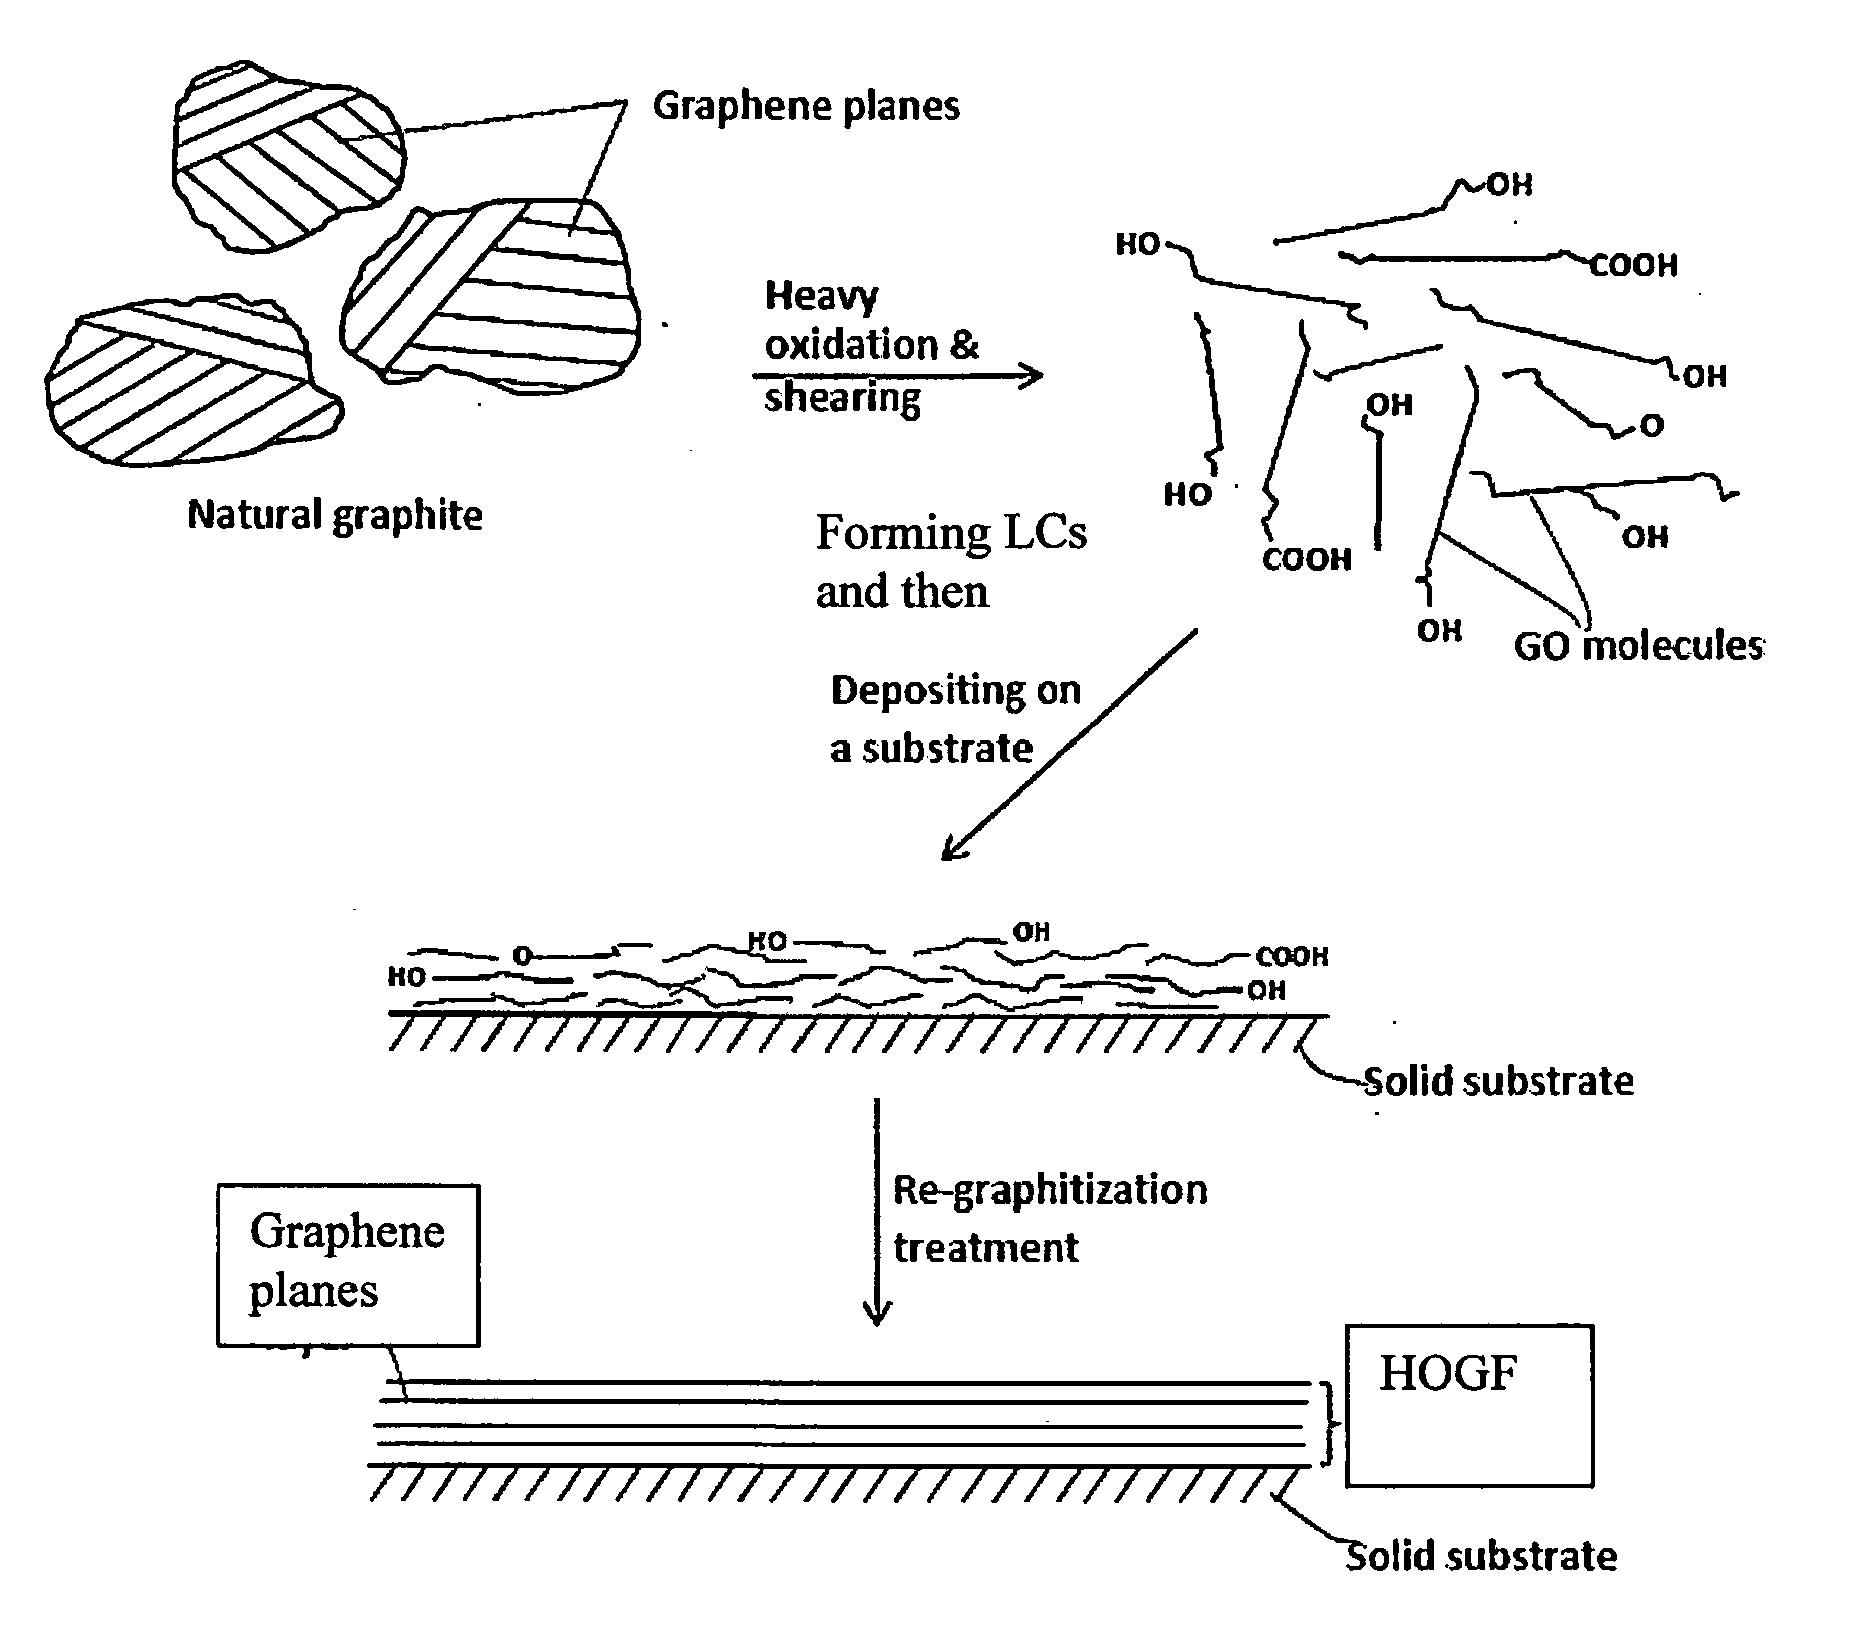 Process for producing highly conducting graphitic films from graphene liquid crystals